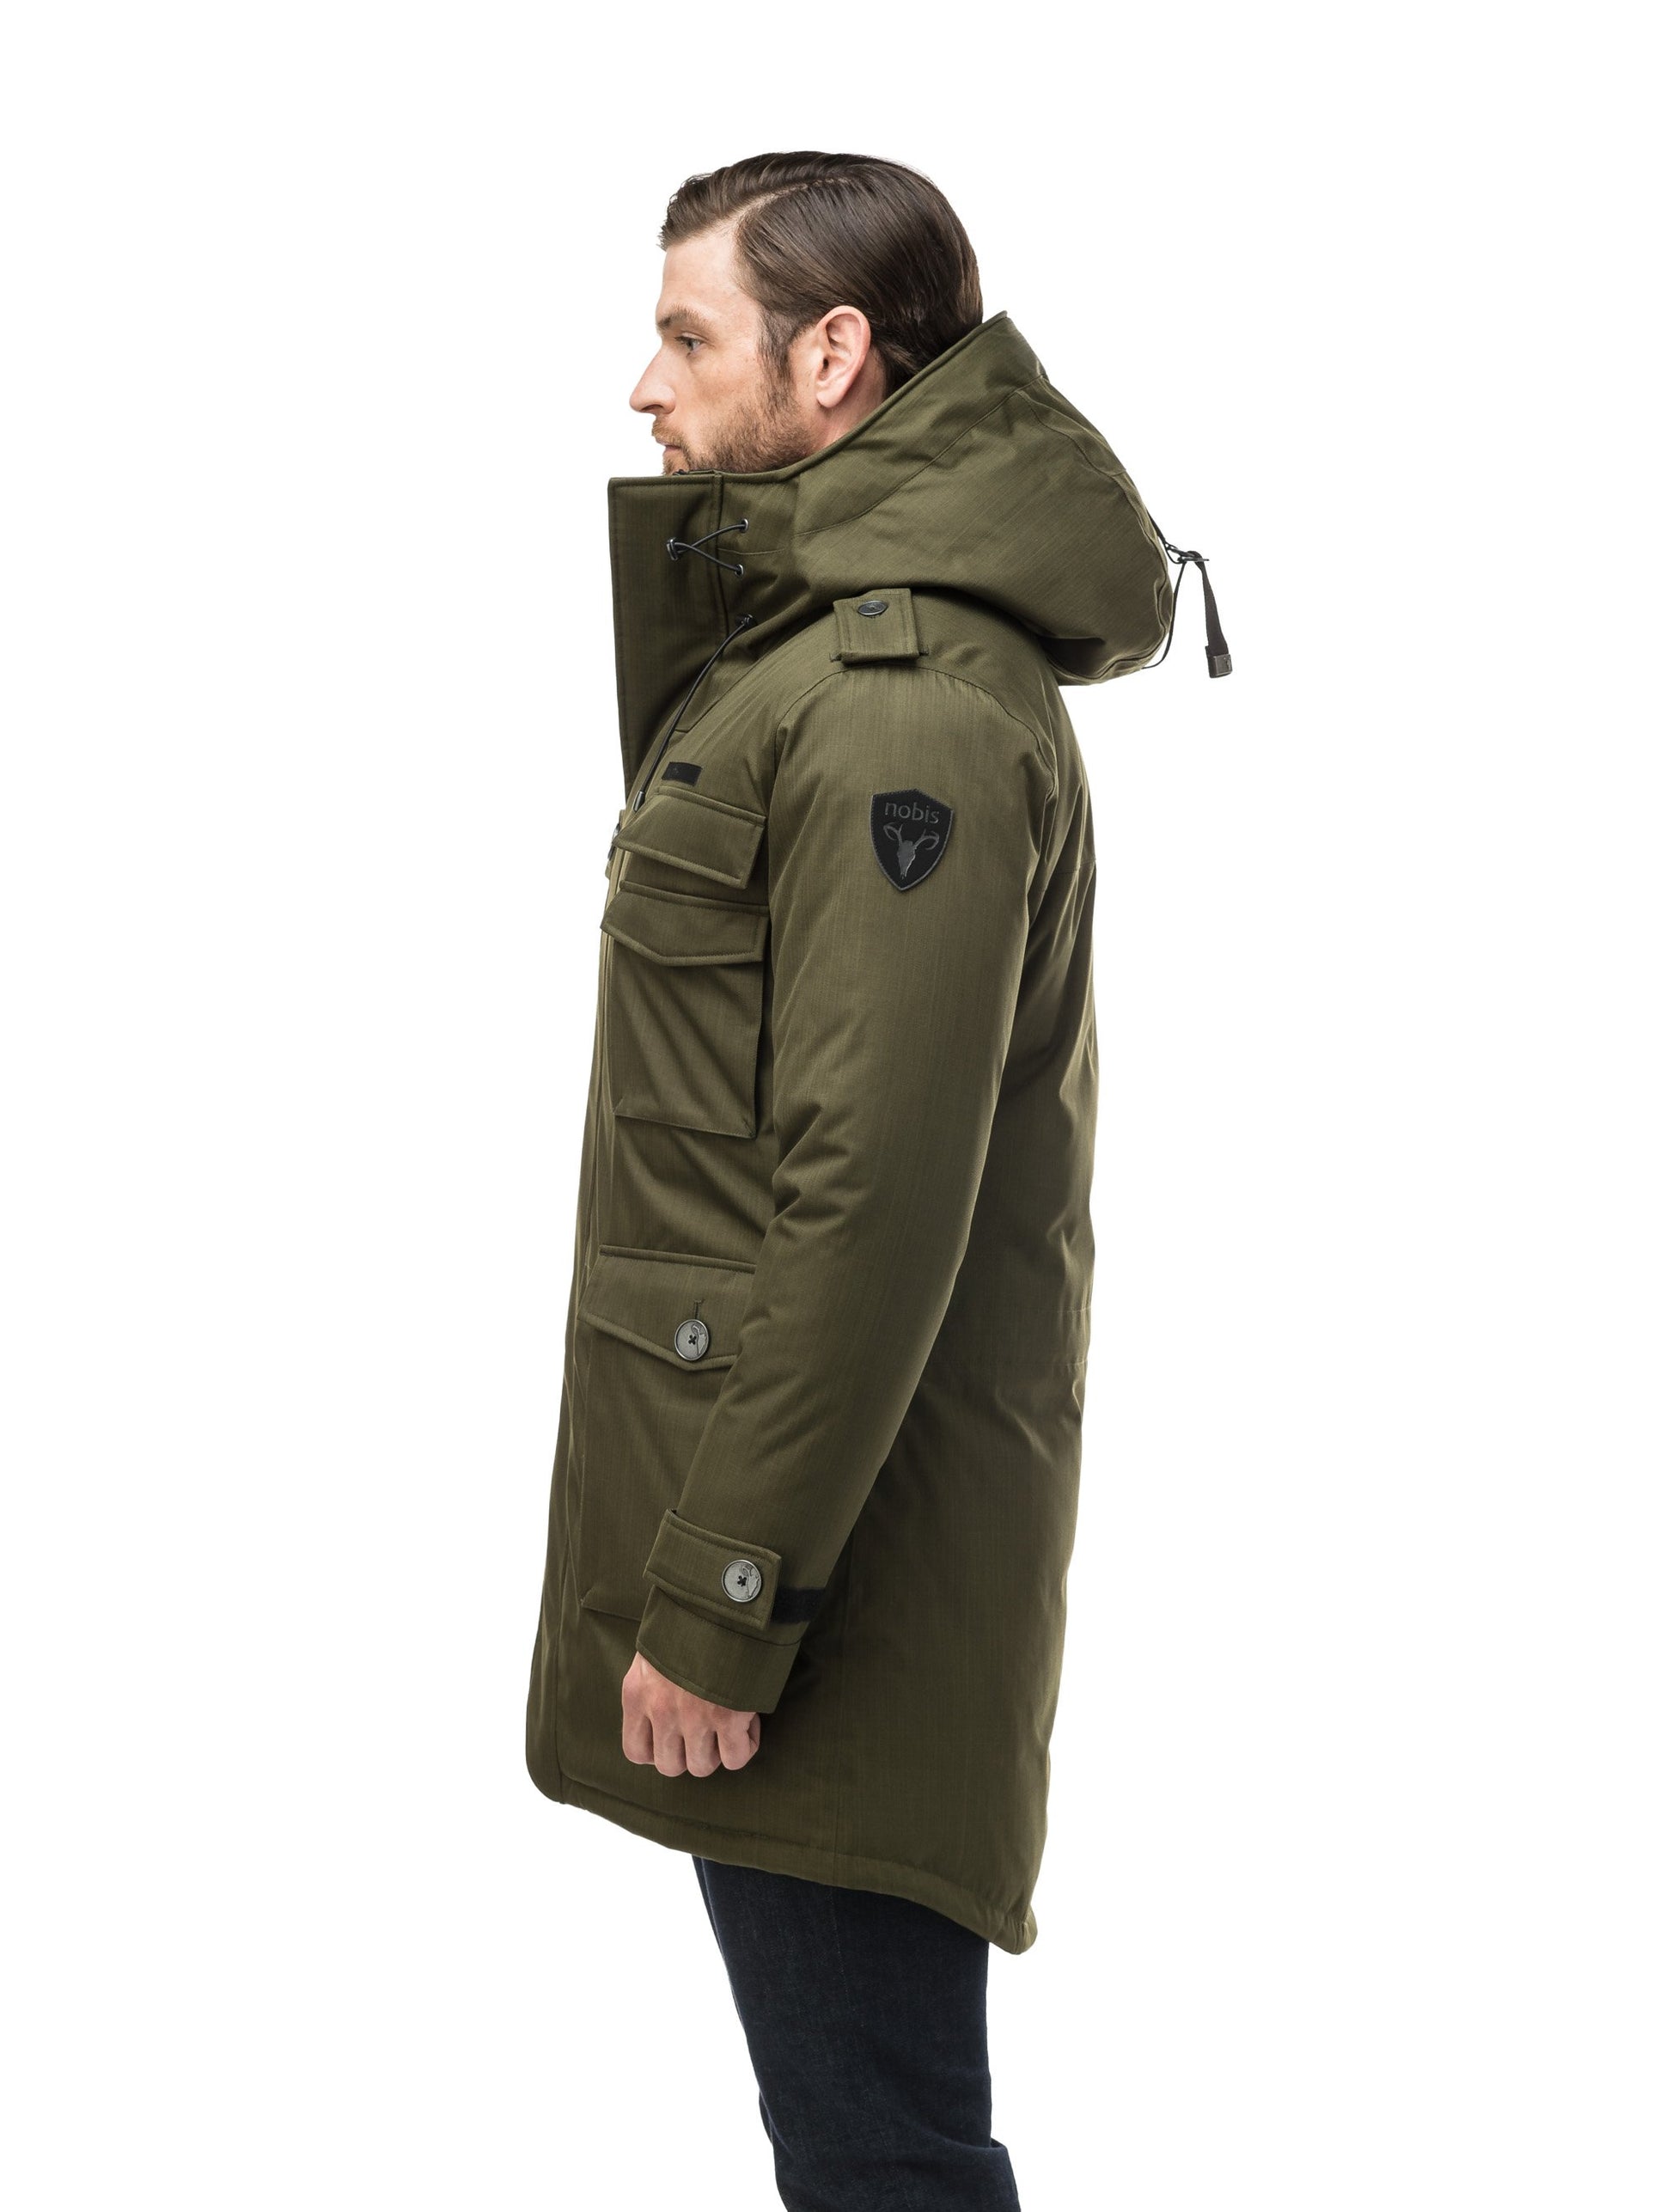 Men's down filled parka with faux button magnet closures and fur free hood with a fishtail hemline in Fatigue